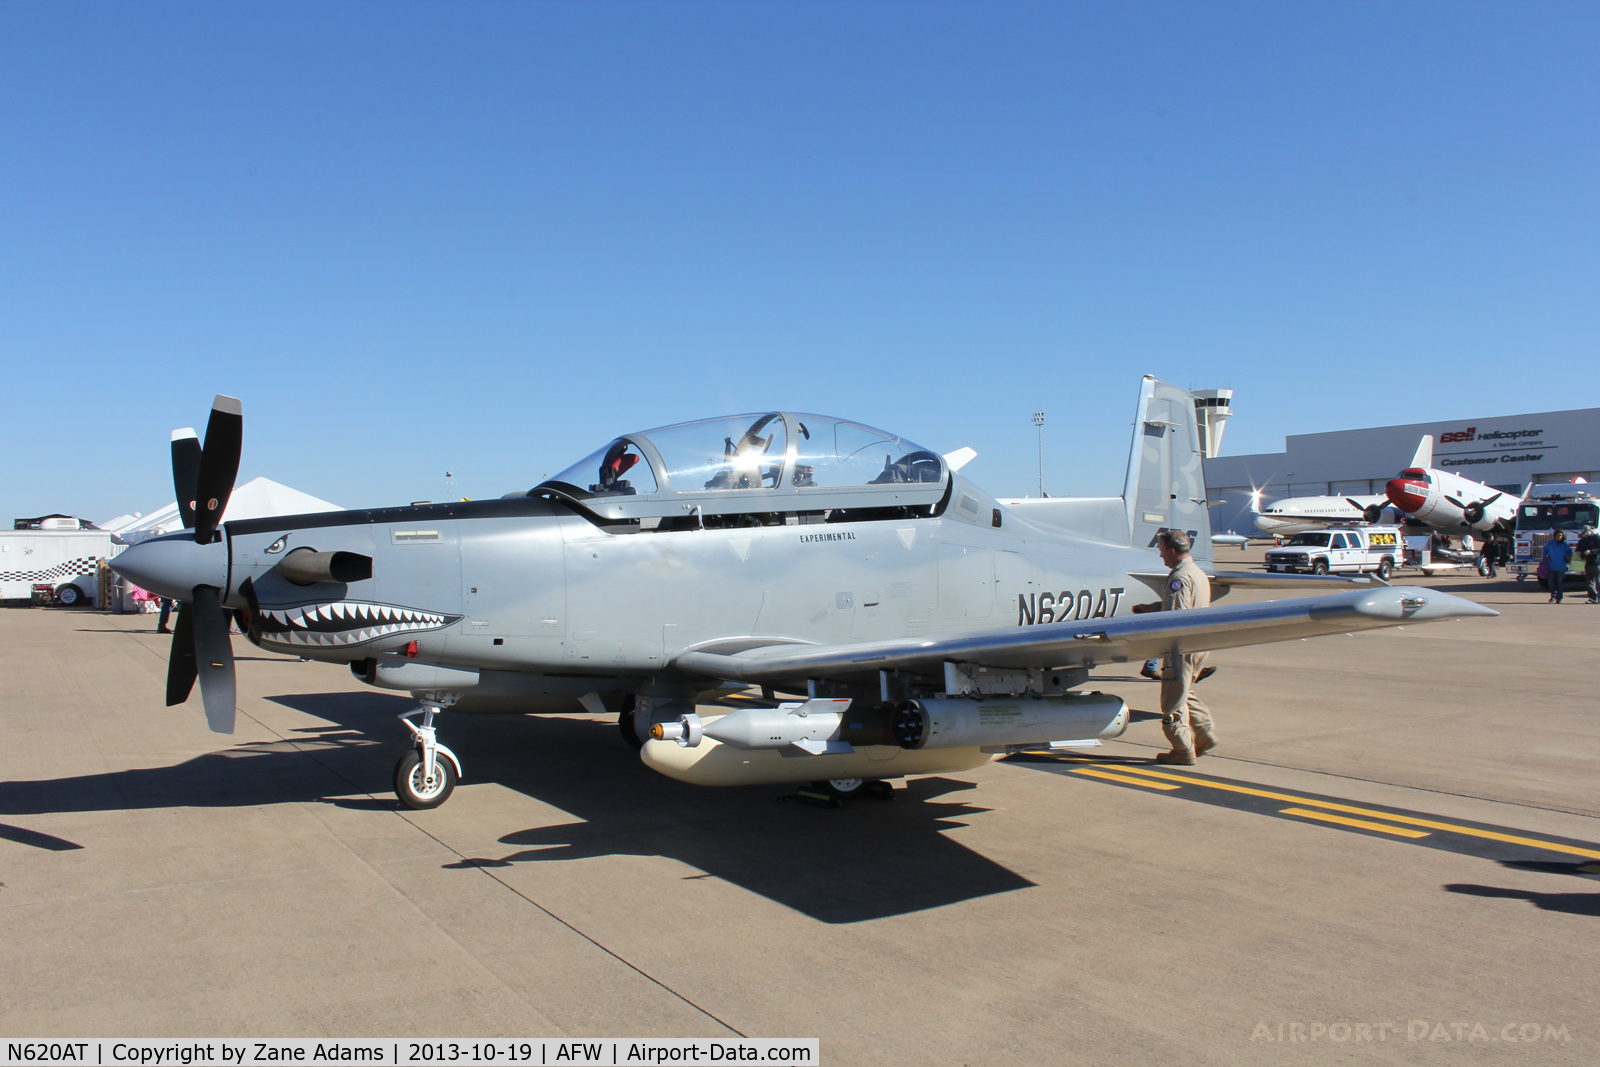 N620AT, Hawker Beechcraft Corp 3000 C/N AT-2, On display at the 2013 Fort Worth Alliance Airshow